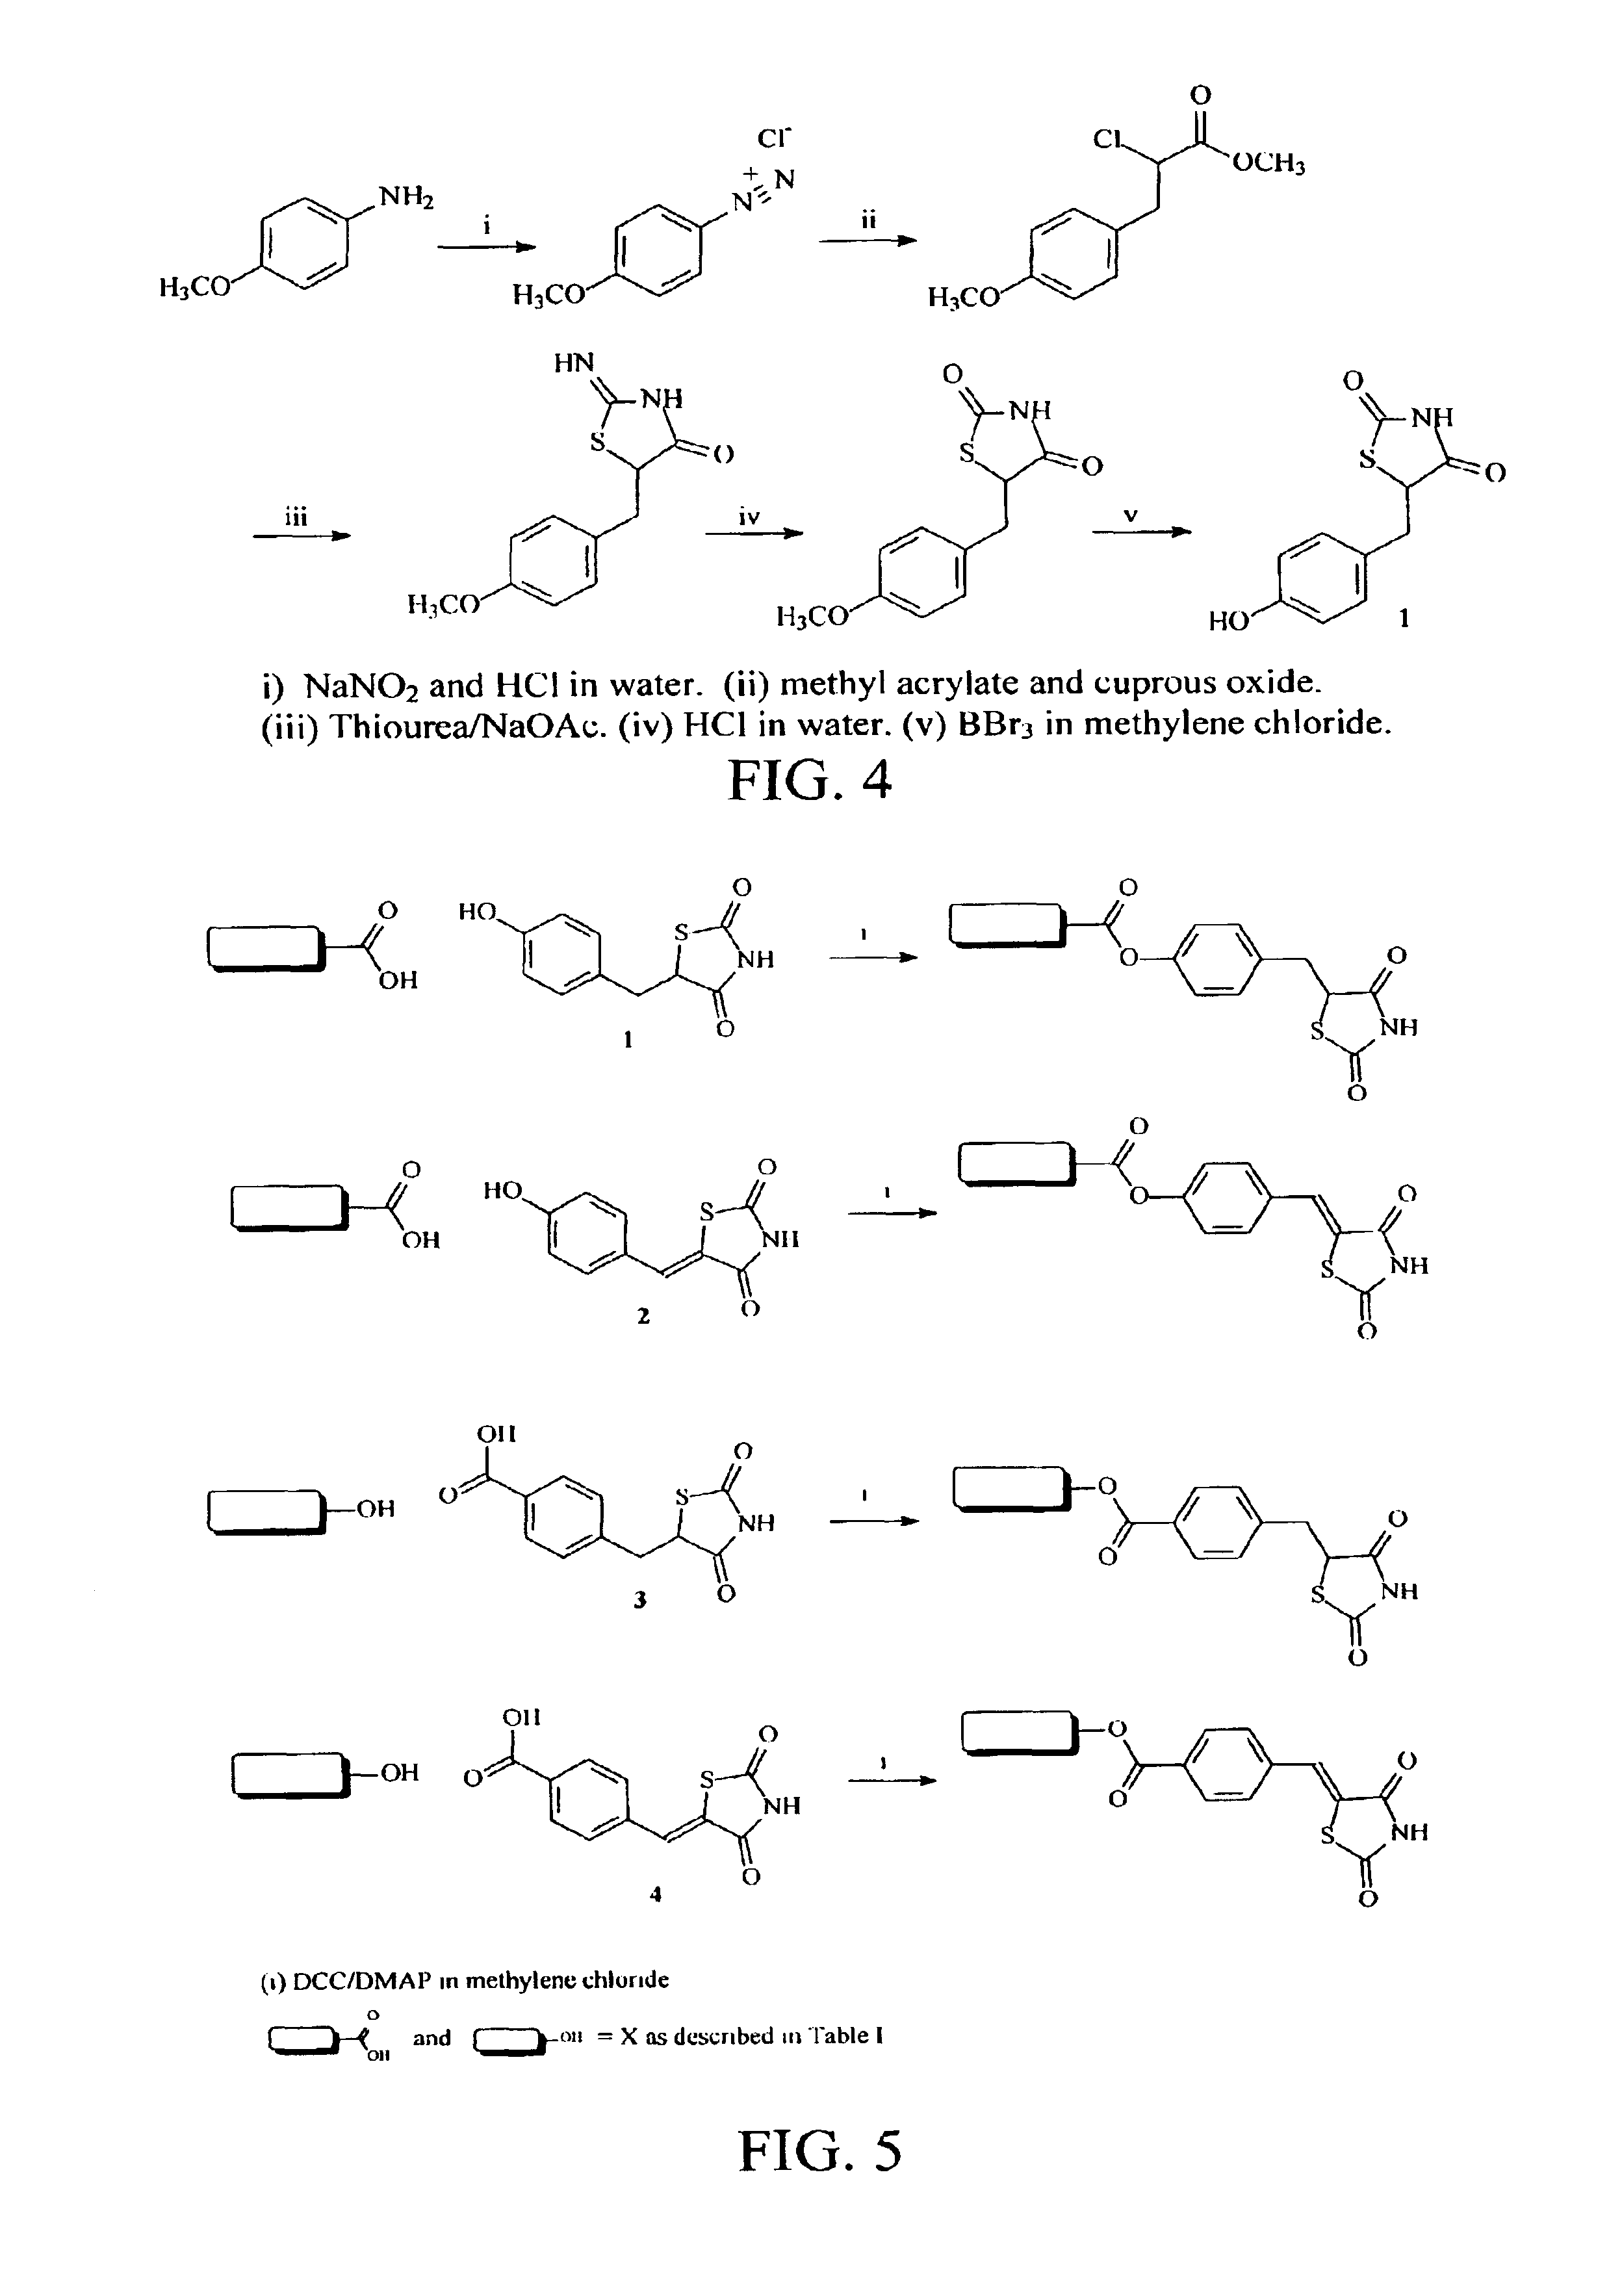 Materials and methods for the treatment of diabetes, hyperlipidemia, hypercholesterolemia, and atherosclerosis